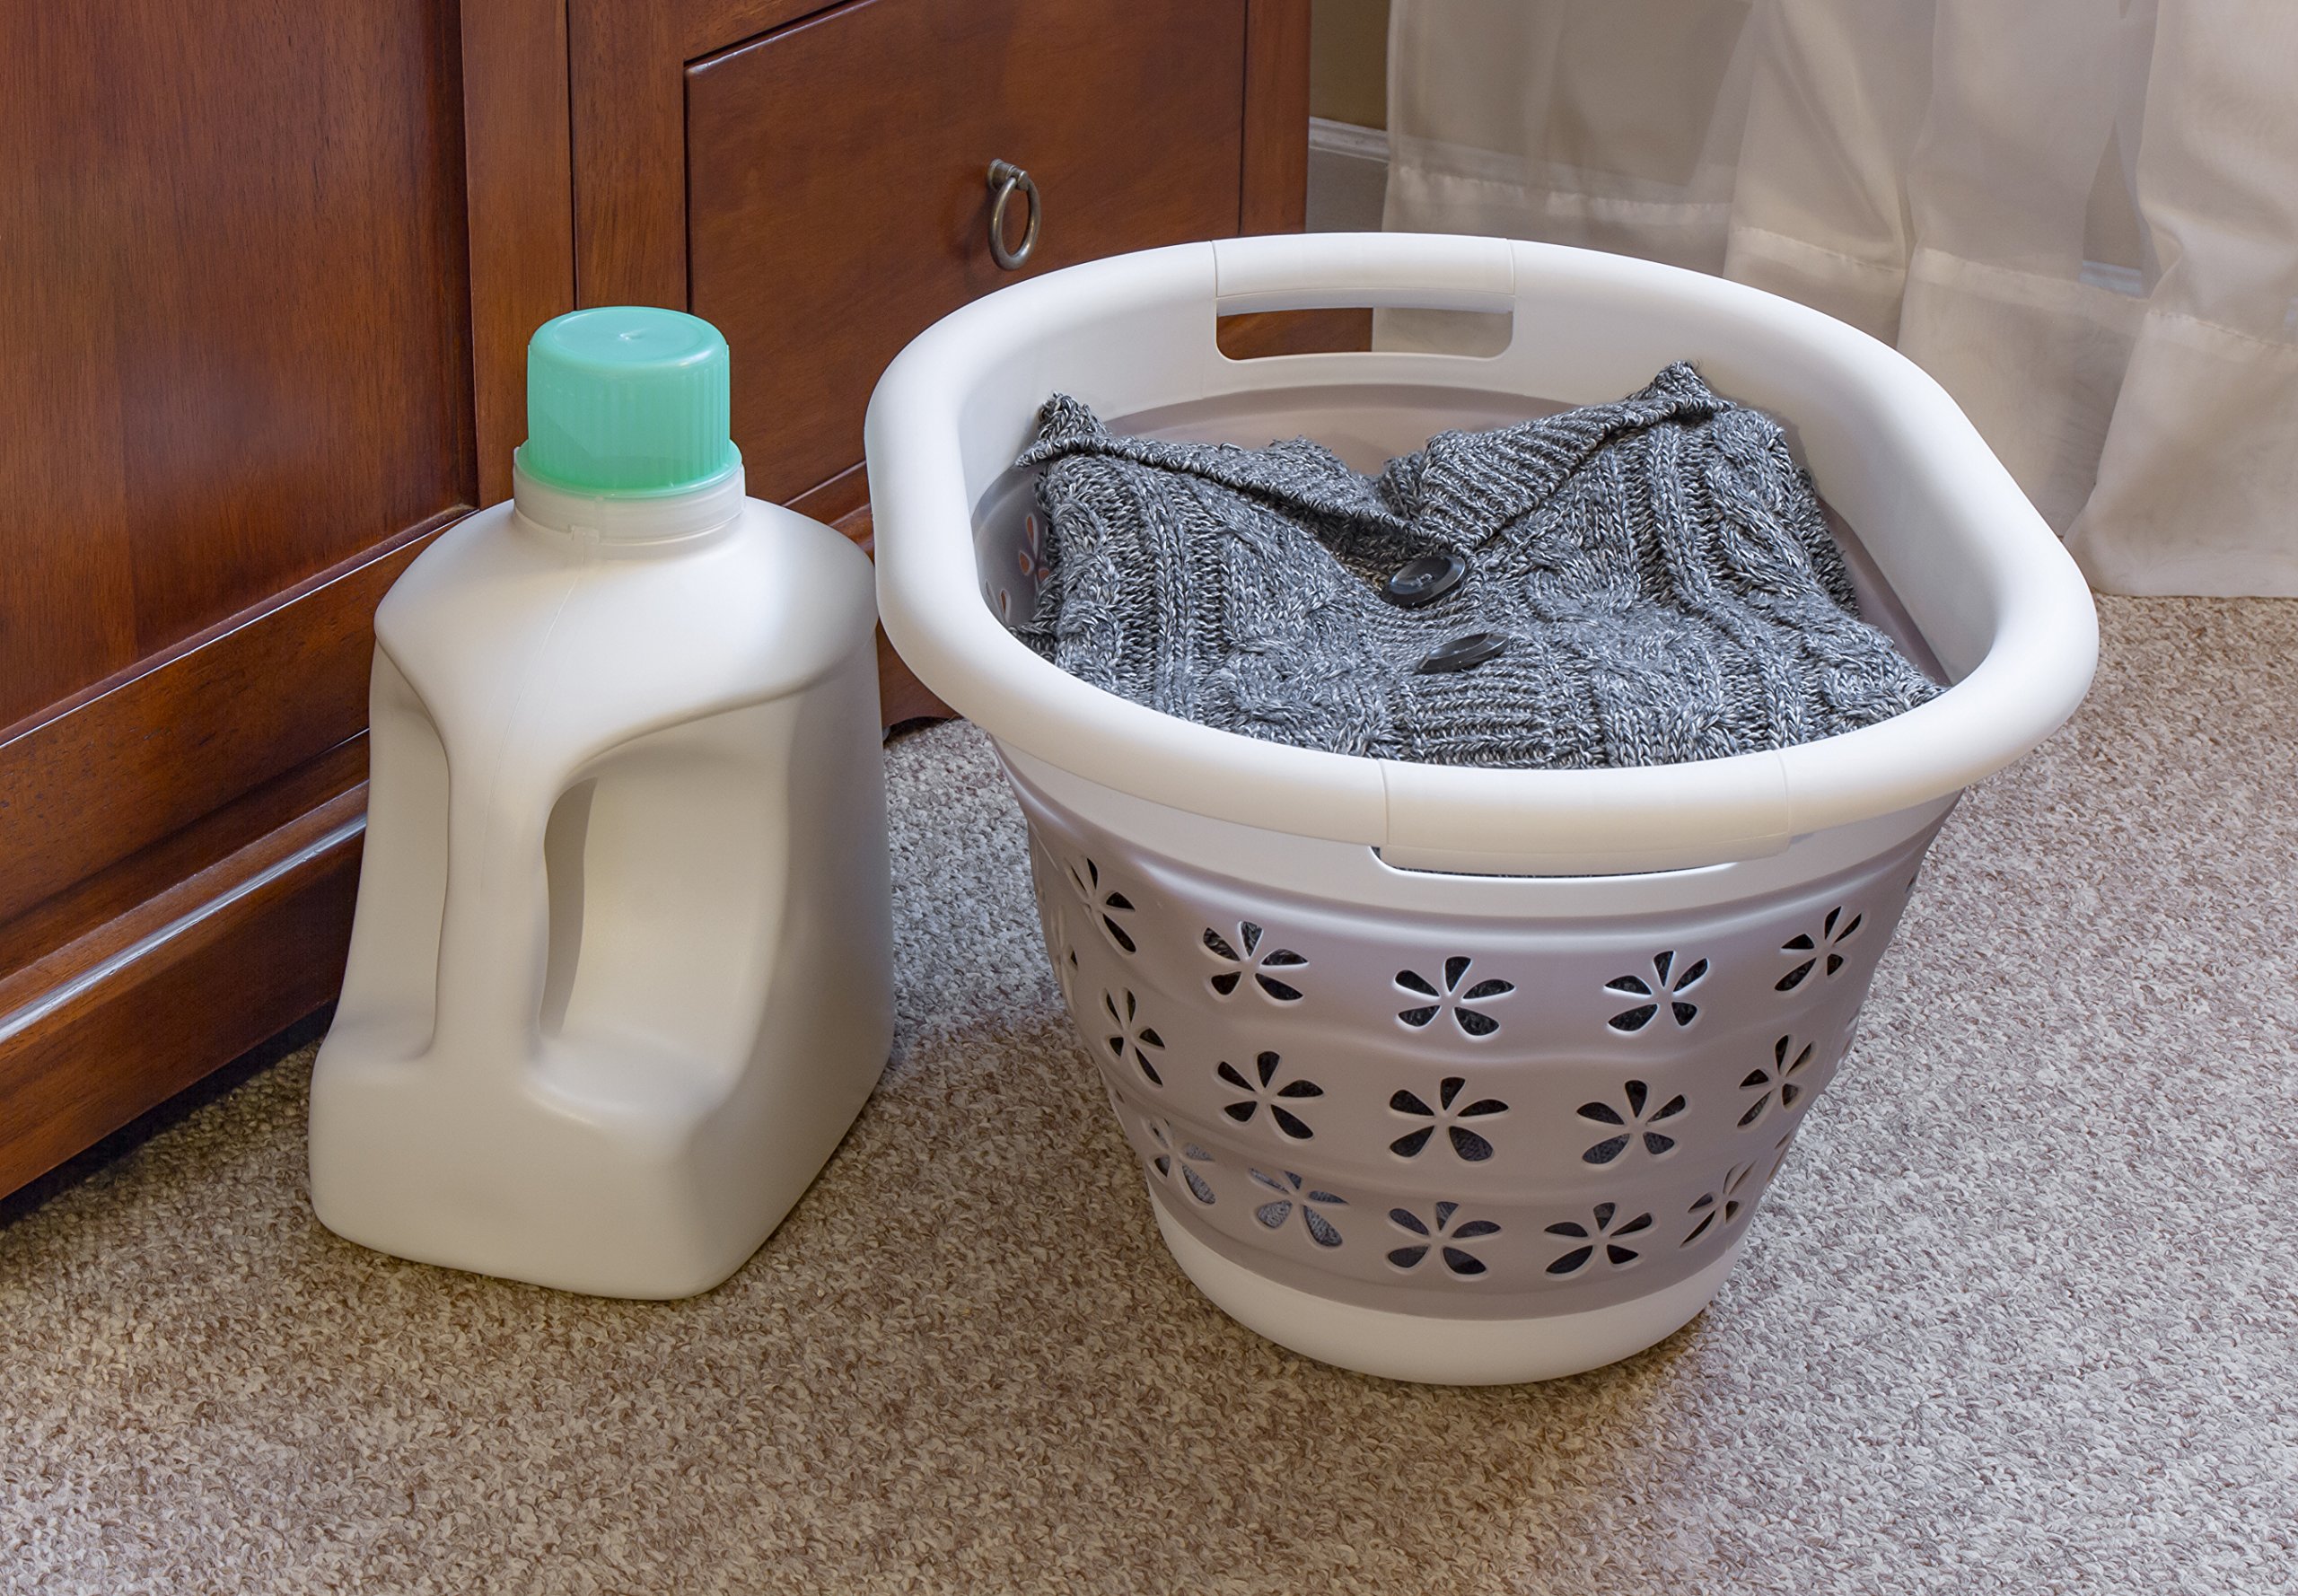 Camco White/Taupe Collapsible Utility/Laundry Basket – Perfect for Homes, Boats, and RVs – Easy Grip Carrying Handles - Foldable for Compact Storage,small - 51951